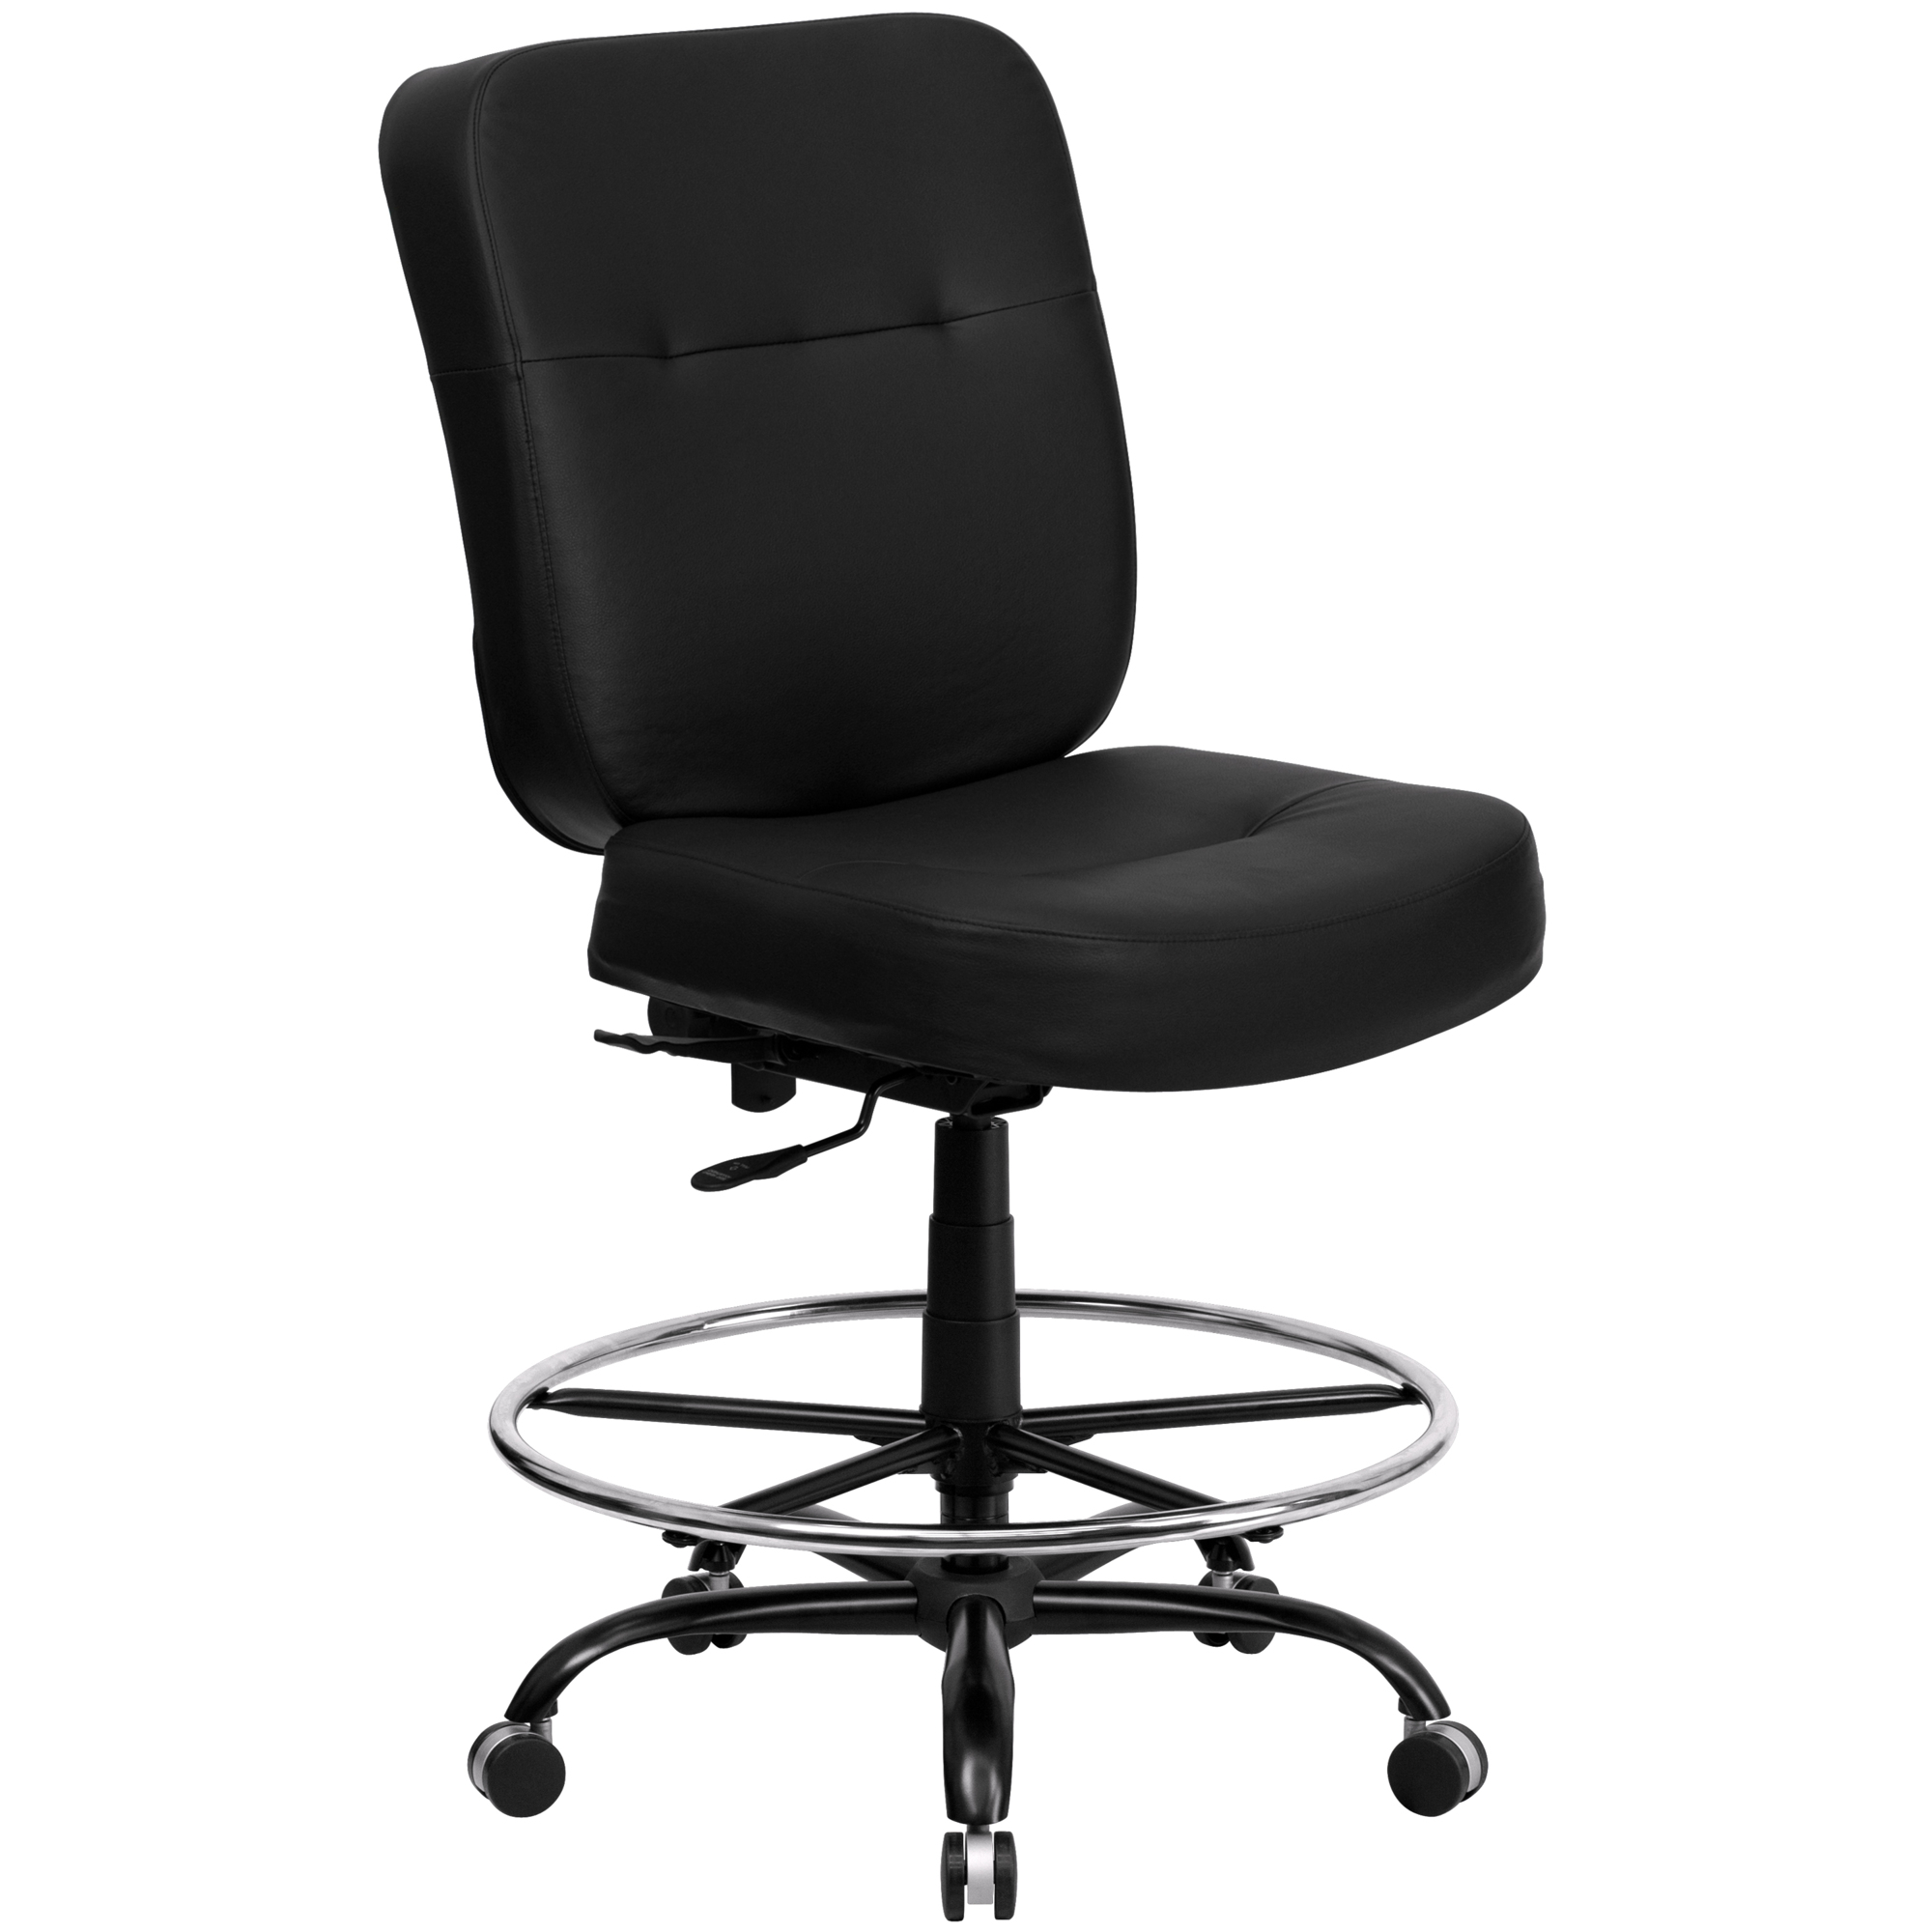 Flash Furniture, Big Tall 400 lb. Rated Black LeatherSoft Chair, Primary Color Black, Included (qty.) 1, Model WL735SYGBKLEAD